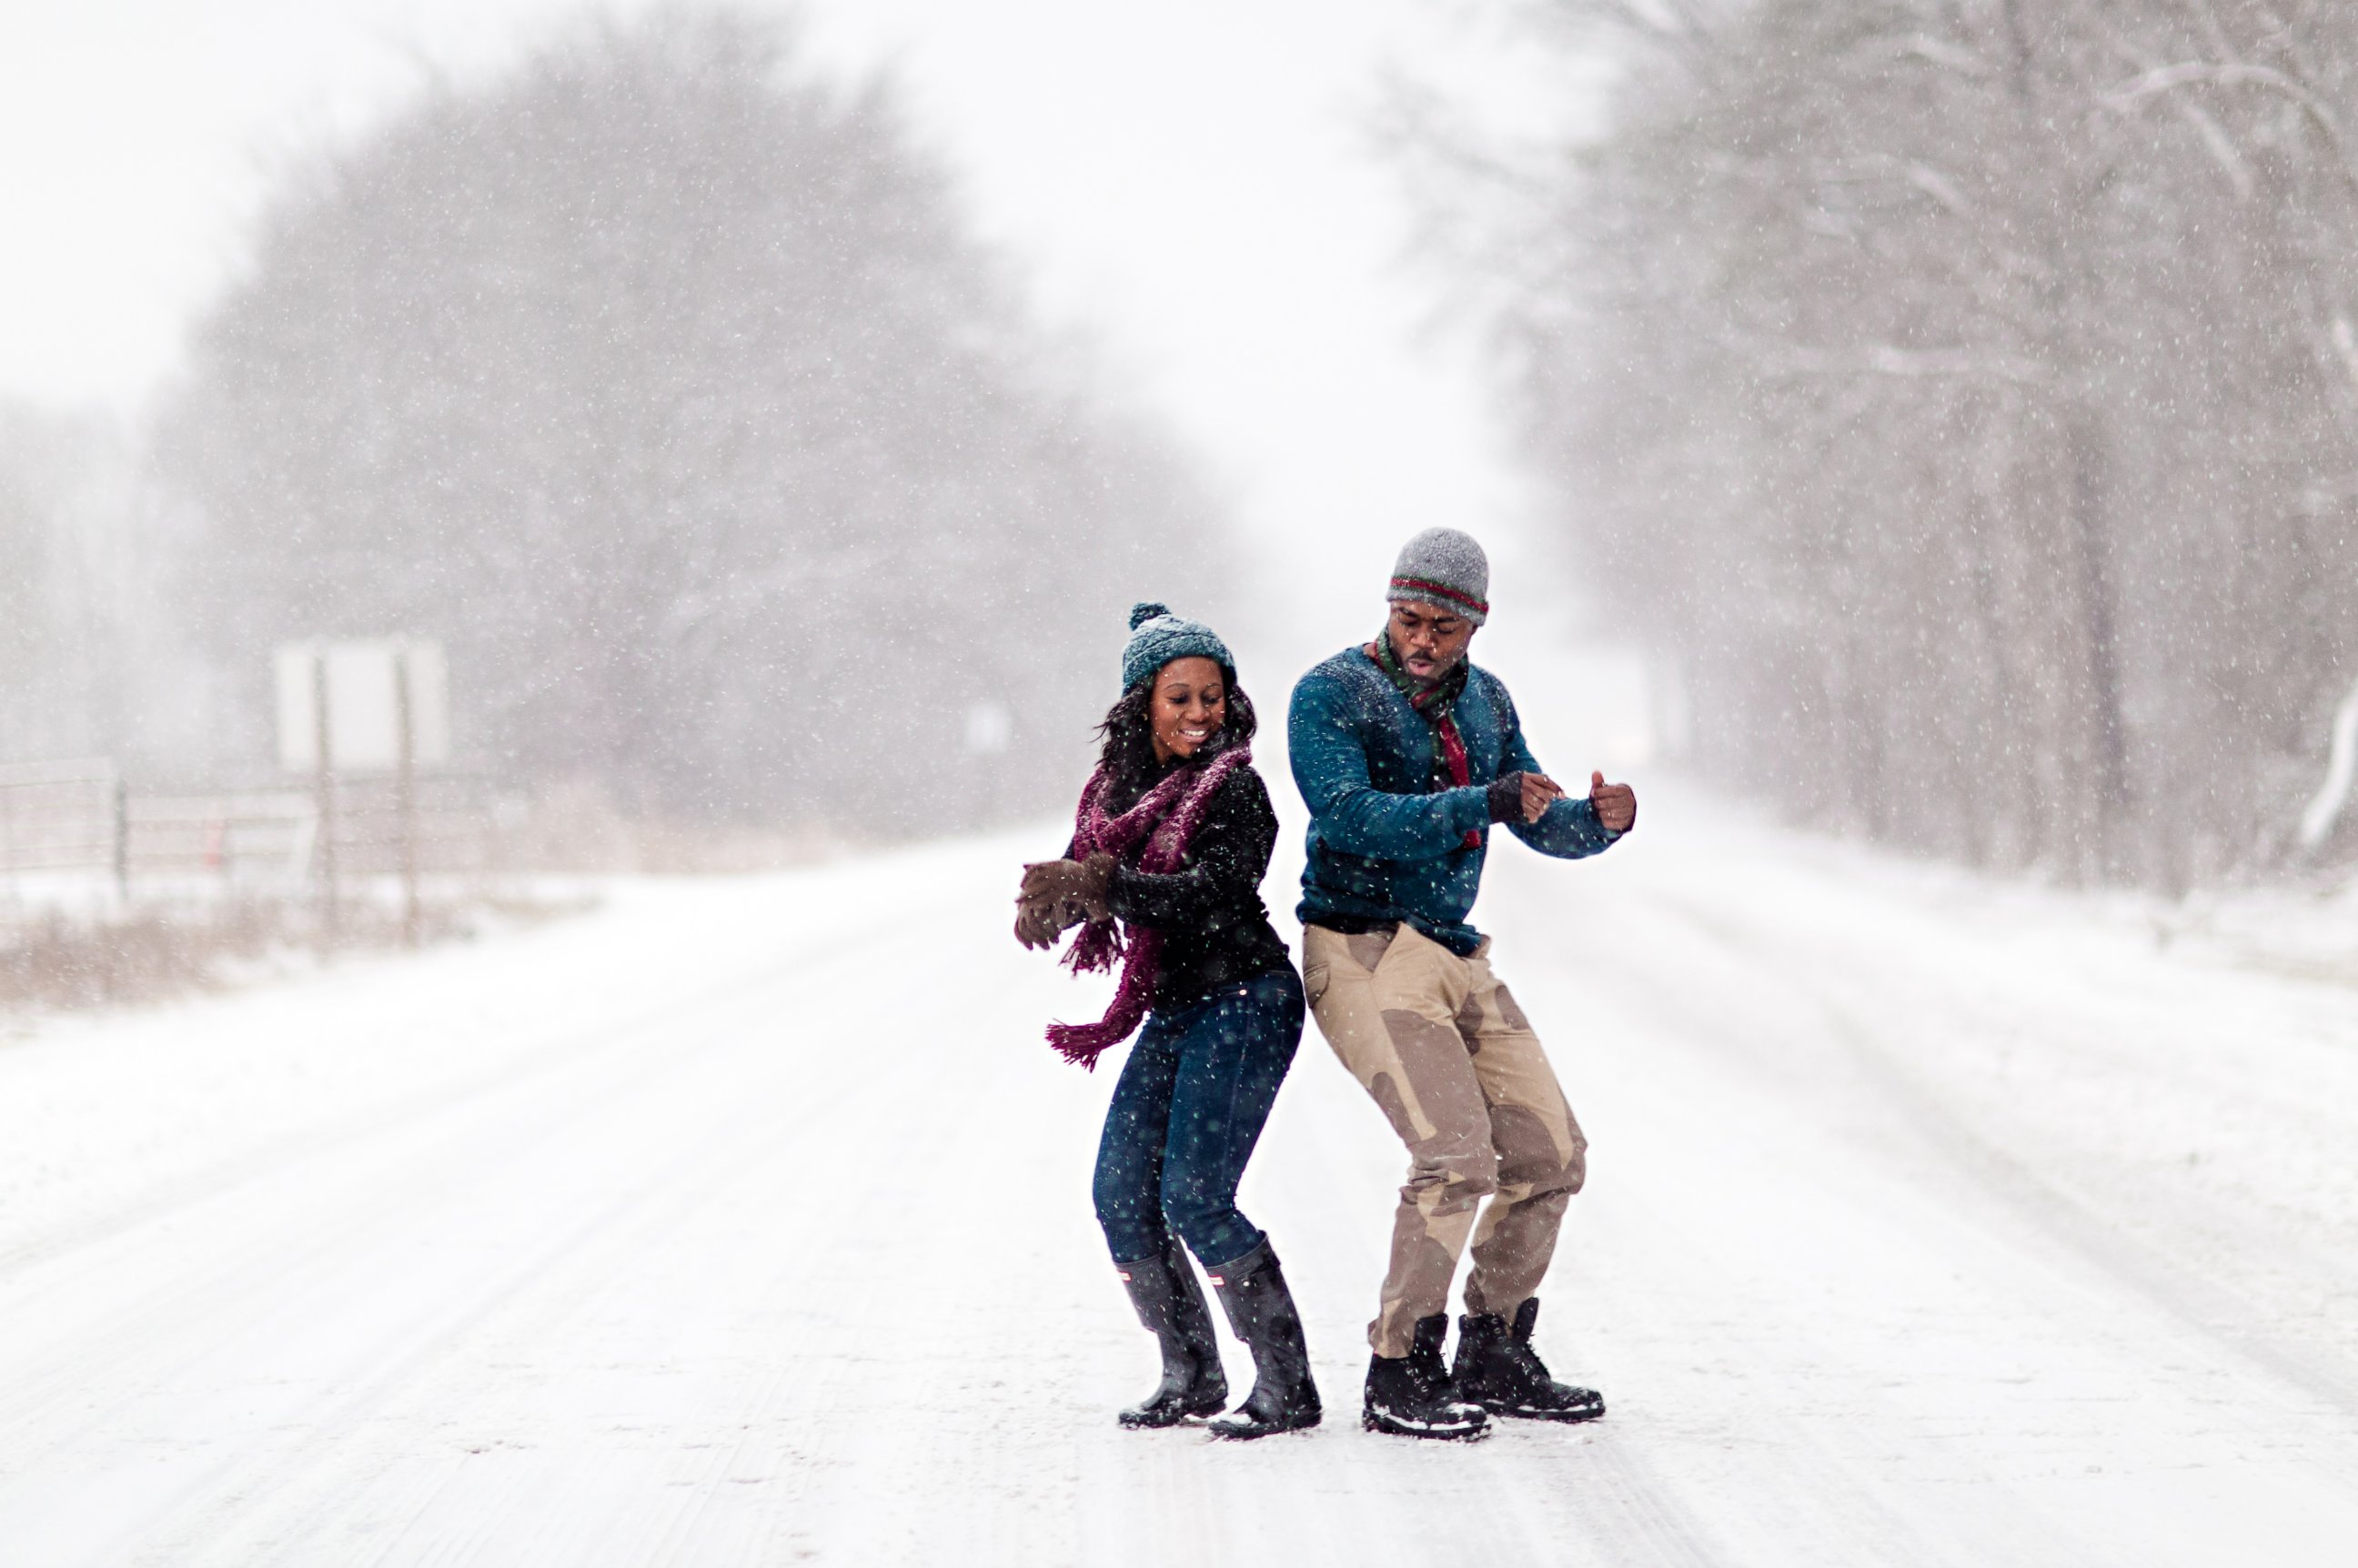 PHOTO: Felicia Sam and David Nartey braved the snow in Fort Meade, Md. for wintery engagement photos.